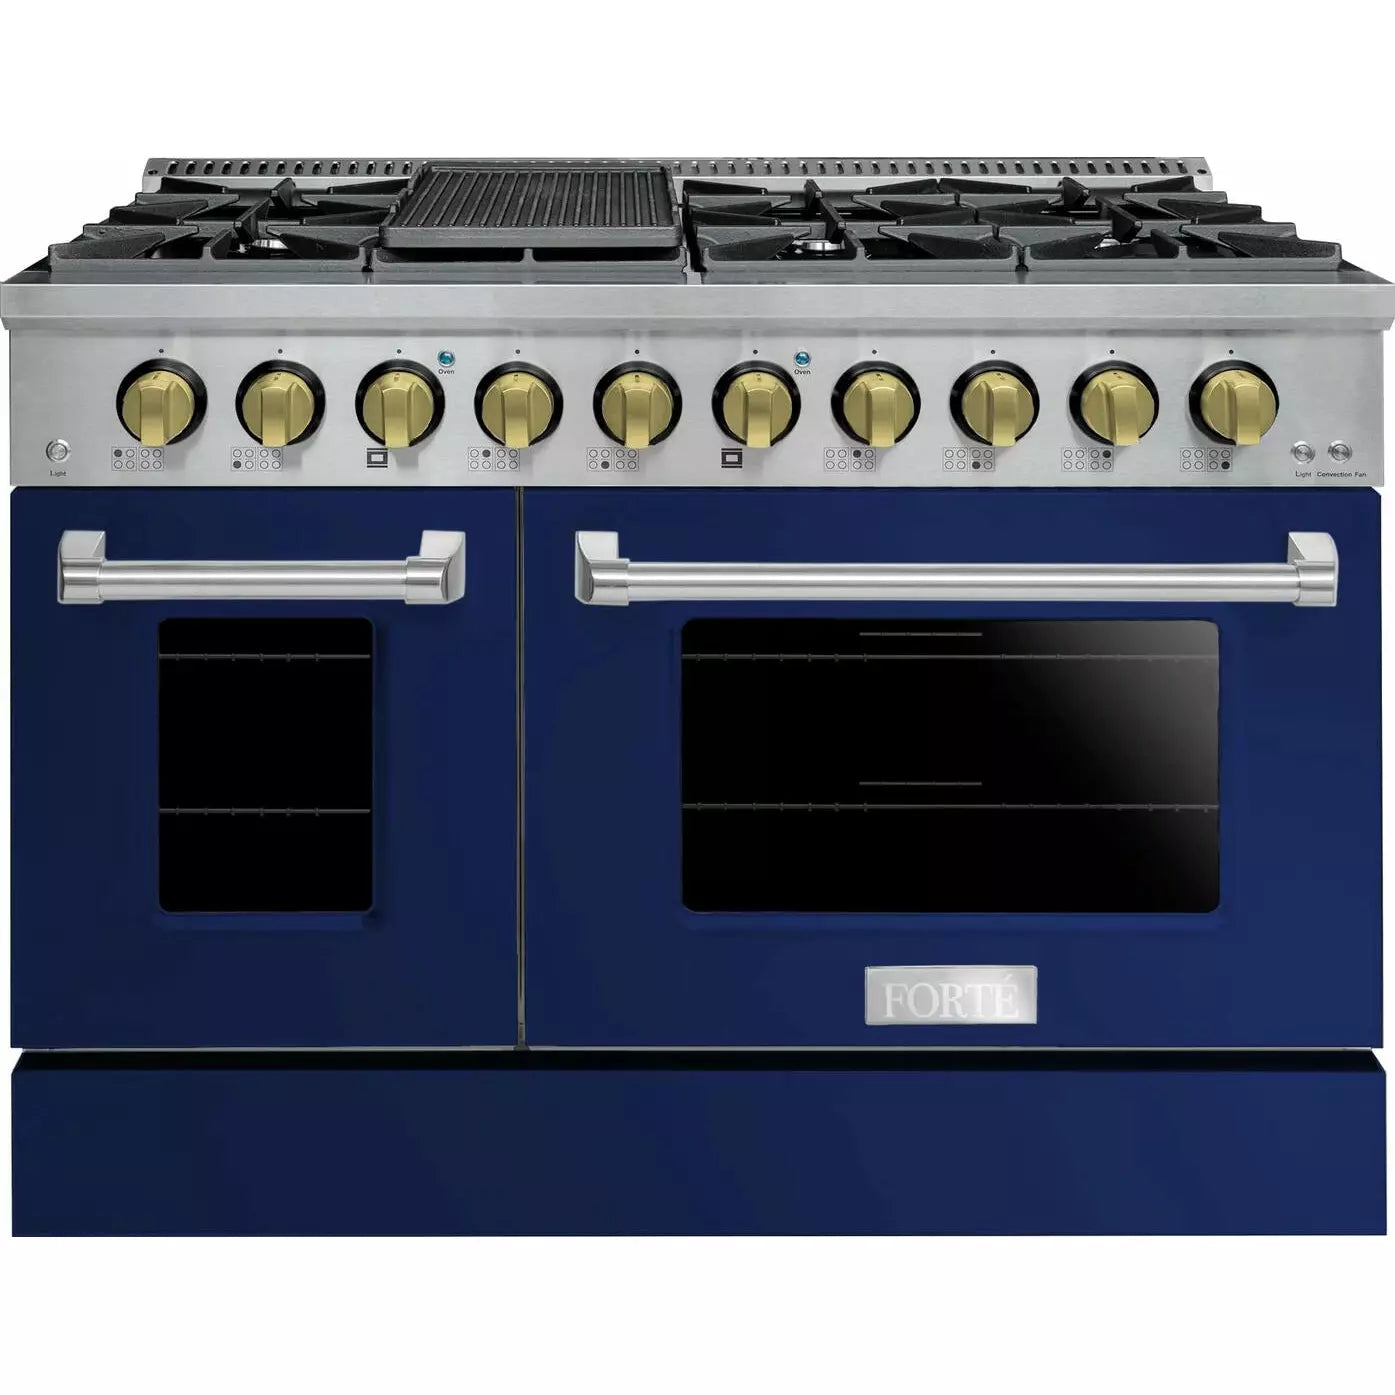 Forte 48" Freestanding All Gas Range - 8 Sealed Italian Made Burners, 5.53 cu. ft. Oven & Griddle - in Stainless Steel With Blue Door And Brass Knob (FGR488BBL4)